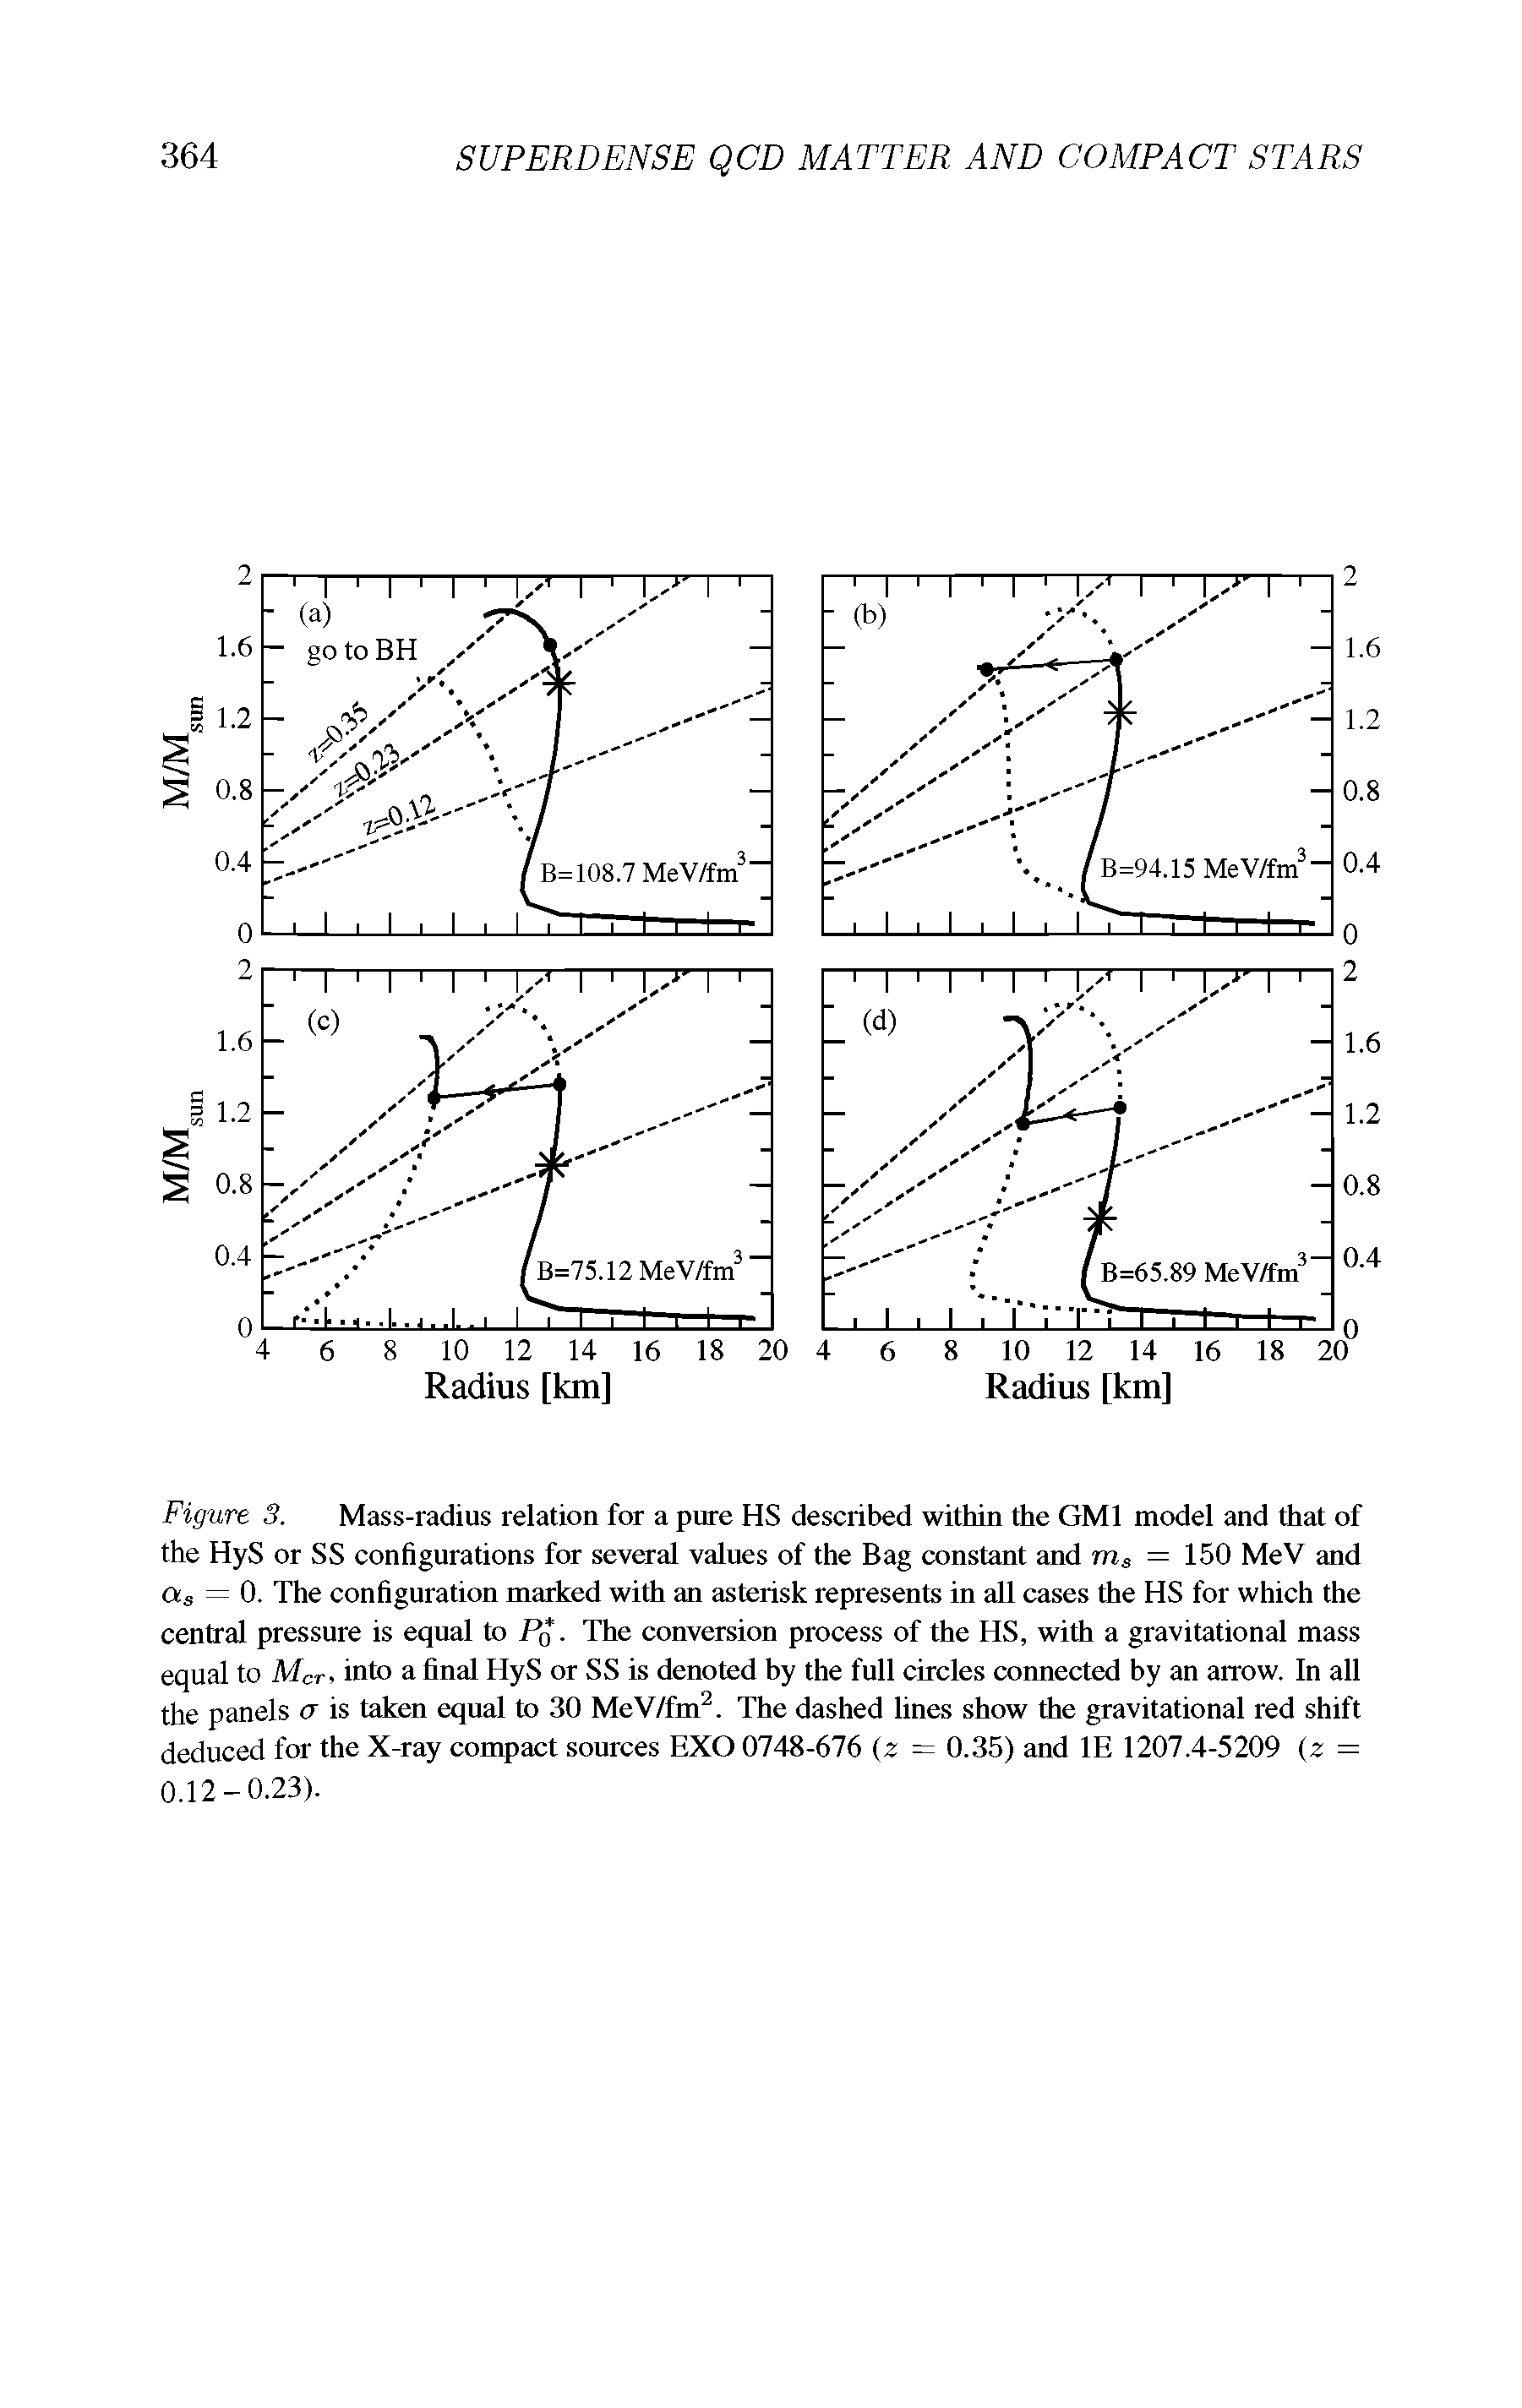 Figure 3. Mass-radius relation for a pure HS described within the GM1 model and that of the HyS or SS configurations for several values of the Bag constant and ms = 150 MeV and as = 0. The configuration marked with an asterisk represents in all cases the HS for which the central pressure is equal to I The conversion process of the HS, with a gravitational mass equal to Mcr, into a final HyS or SS is denoted by the full circles connected by an arrow. In all the panels a is taken equal to 30 MeV/fm2. The dashed lines show the gravitational red shift deduced for the X-ray compact sources EXO 0748-676 (z = 0.35) and IE 1207.4-5209 (z = 0.12-0.23).